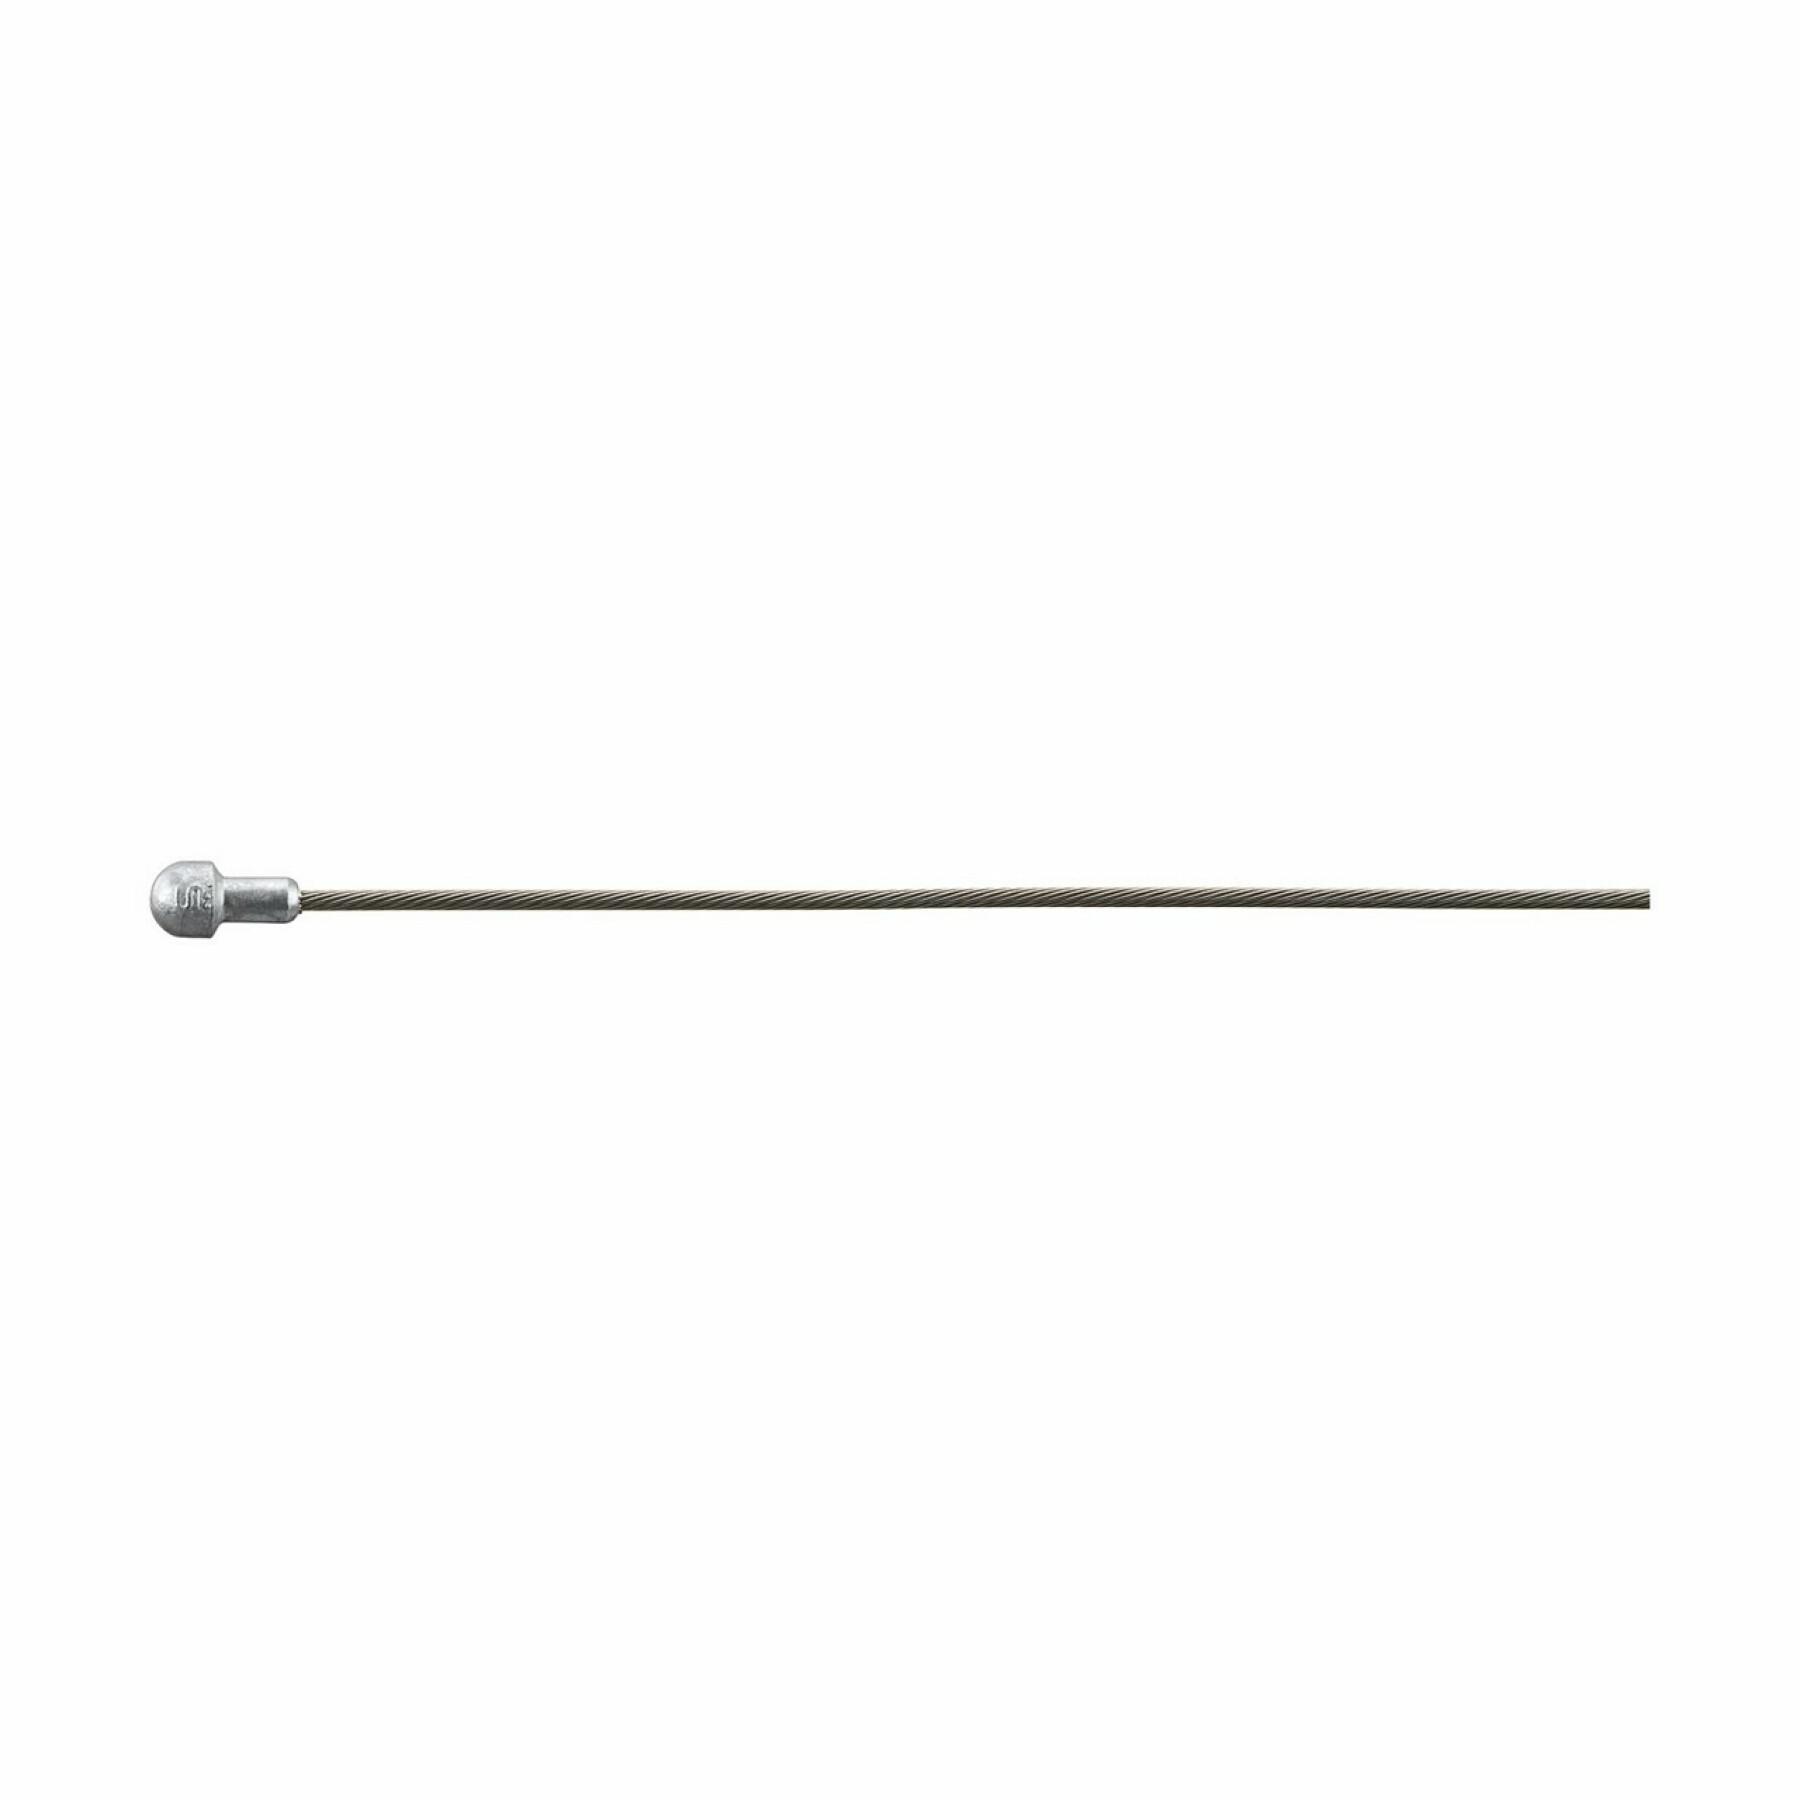 Stainless steel brake cable for racing Shimano